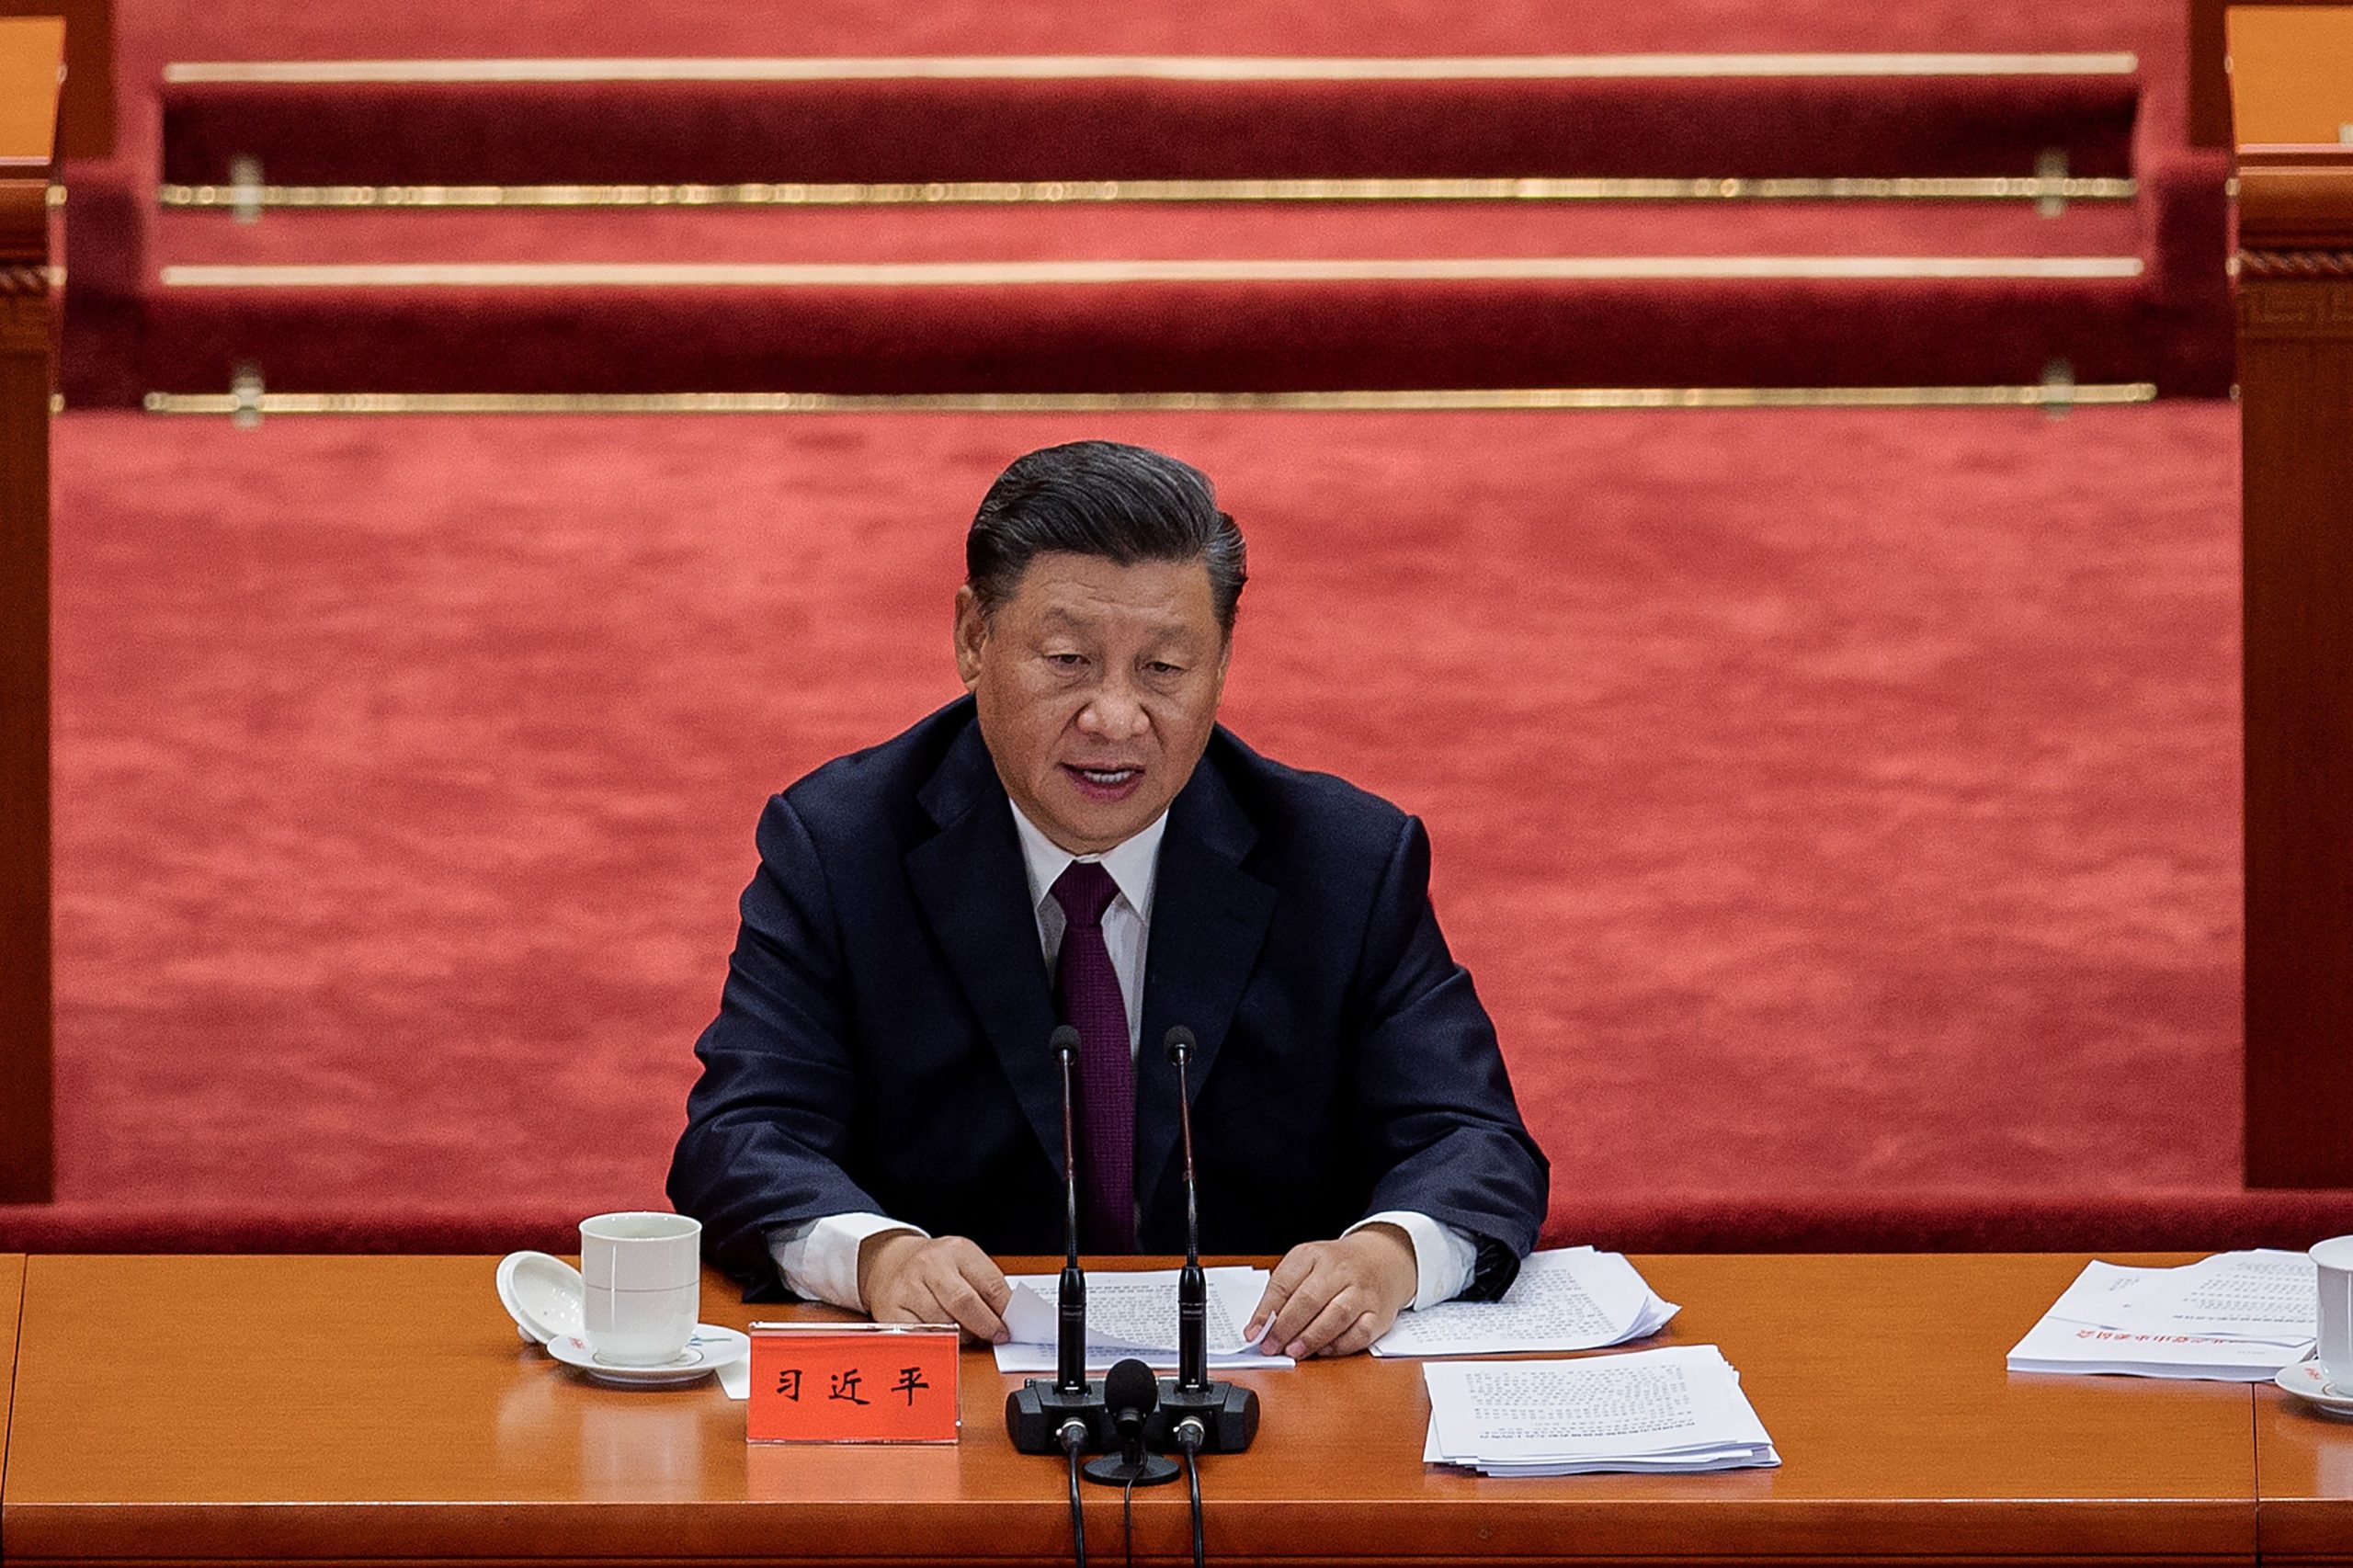 Chinese president xi jinping (c) delivers a speech during a ceremony to honour people who fought against the covid-19 coronavirus pandemic, at the great hall of the people in beijing on september 8, 2020. (photo by nicolas asfouri / afp) (photo by nicolas asfouri/afp via getty images)